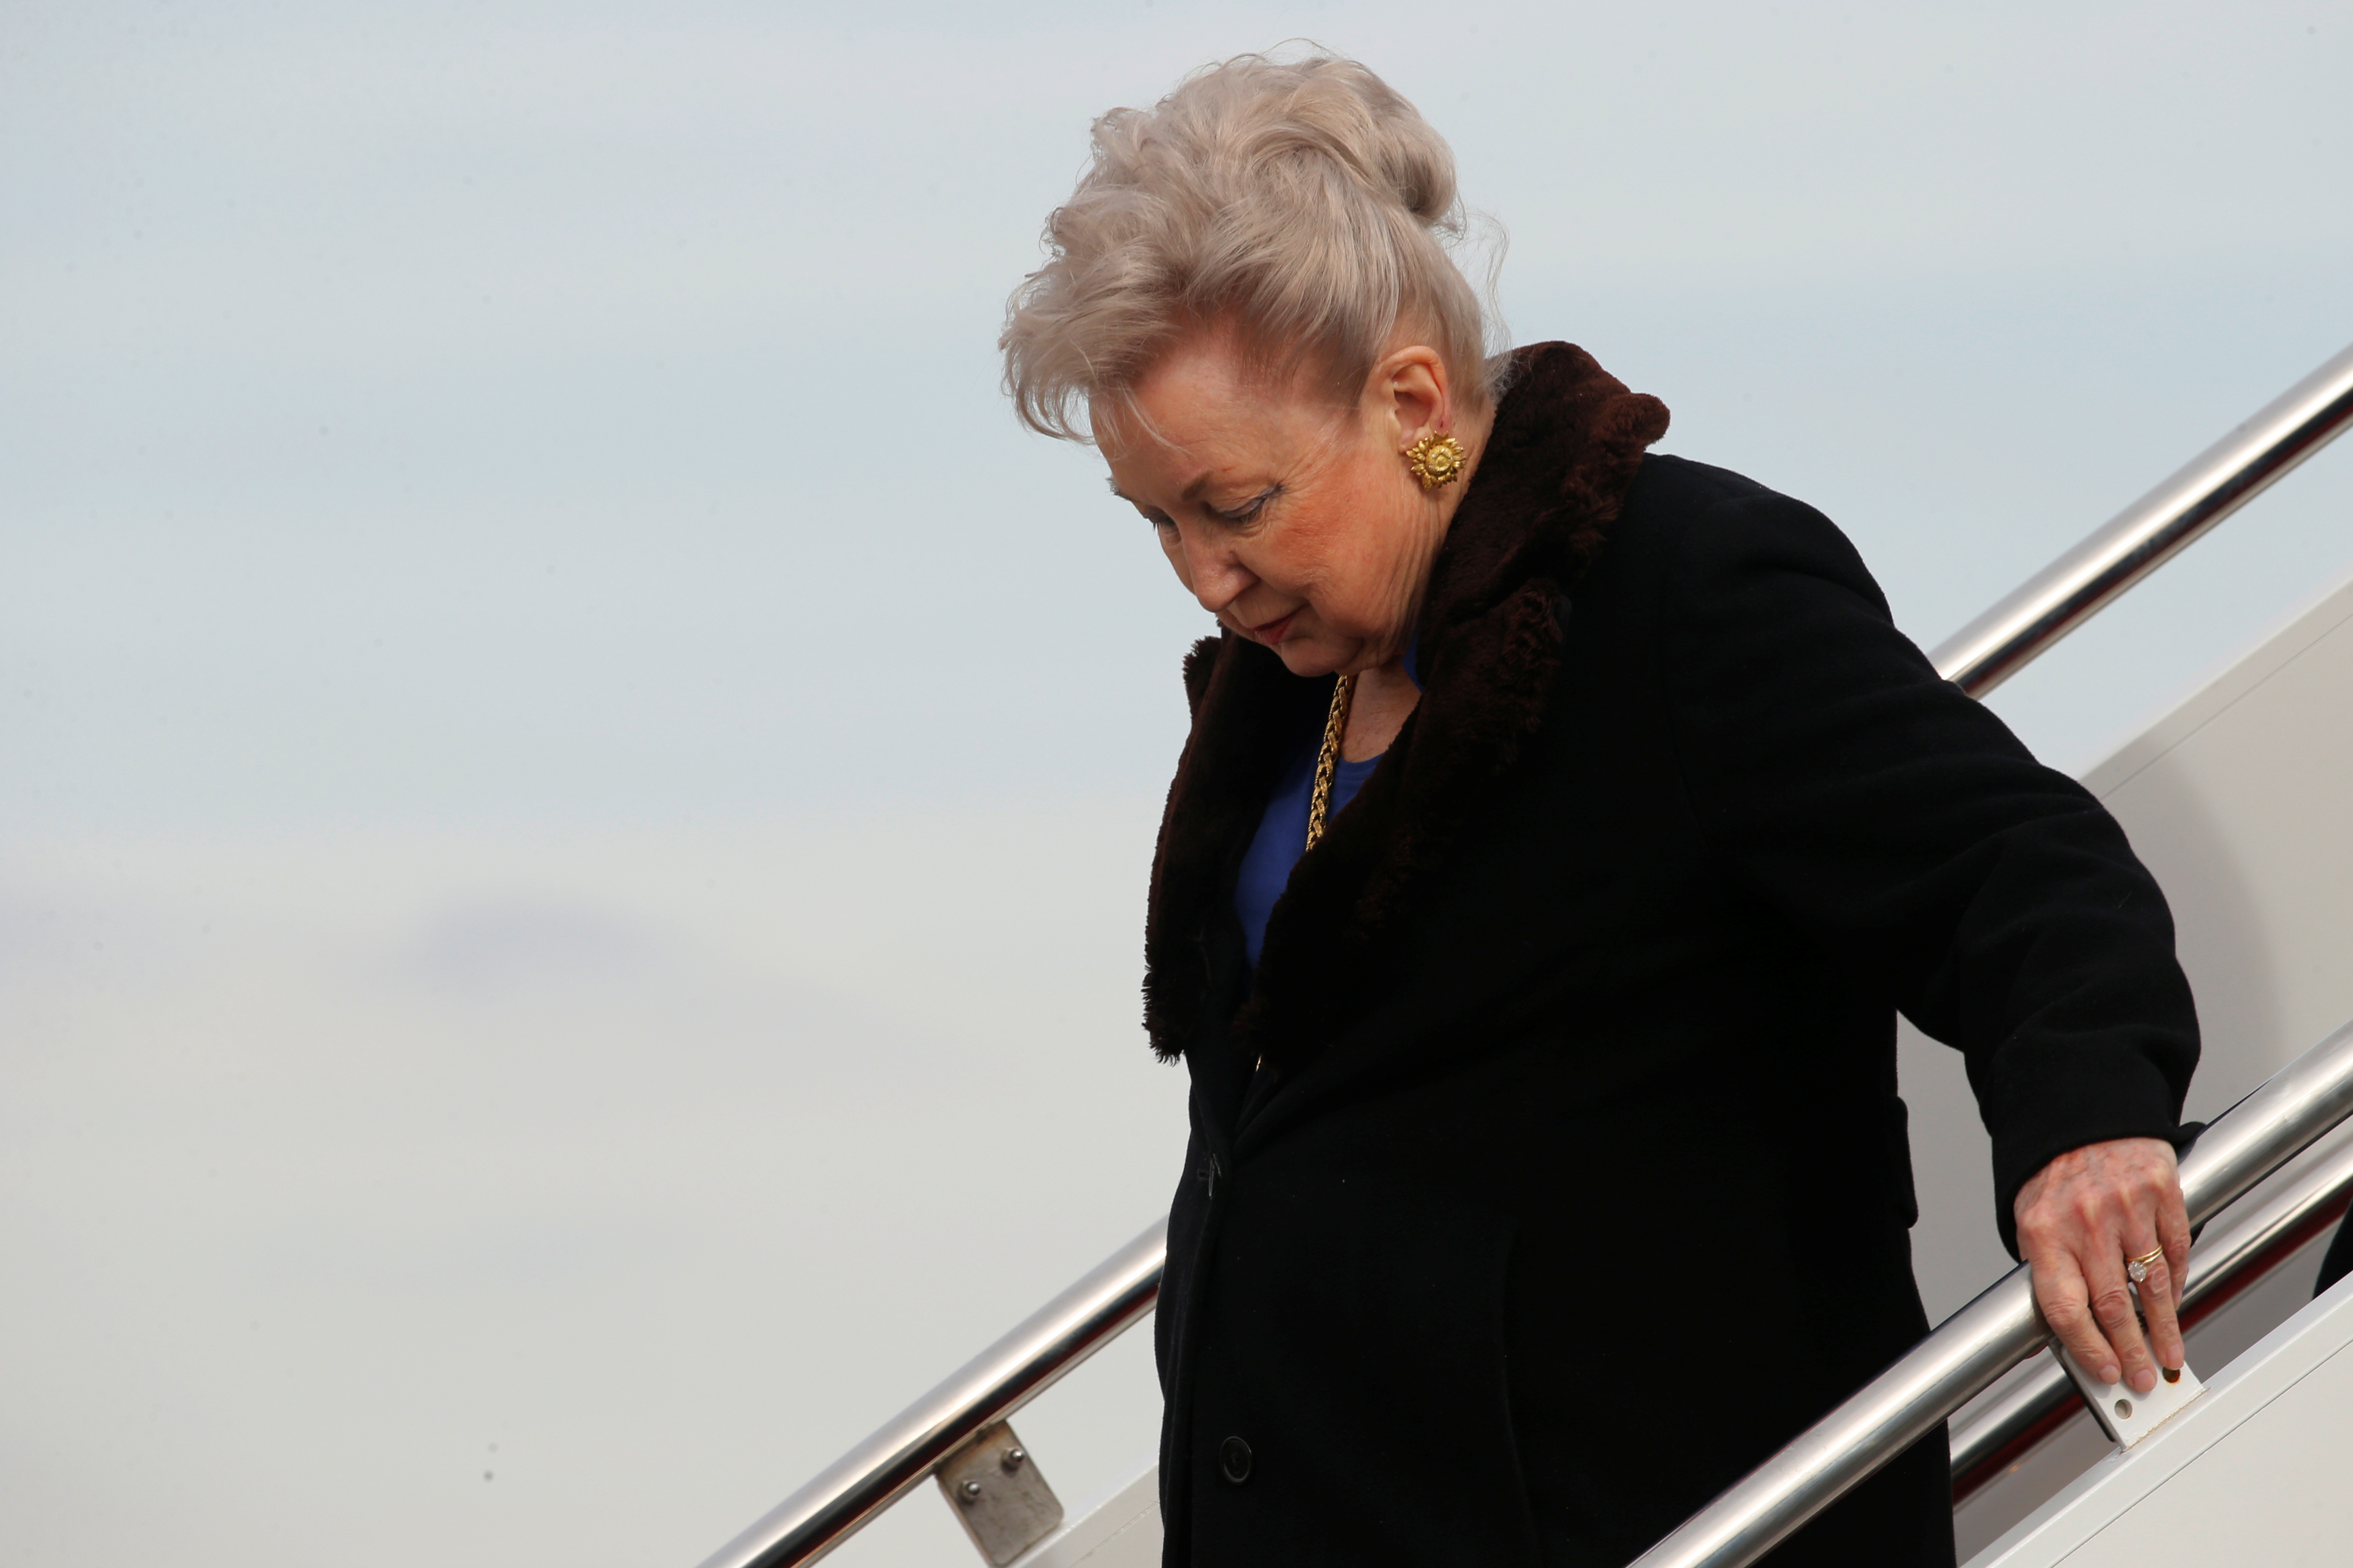 President Donald Trump's sister Maryanne Trump Barry arrives at Joint Base Andrews, Maryland on January 19, 2017. REUTERS/Jonathan Ernst